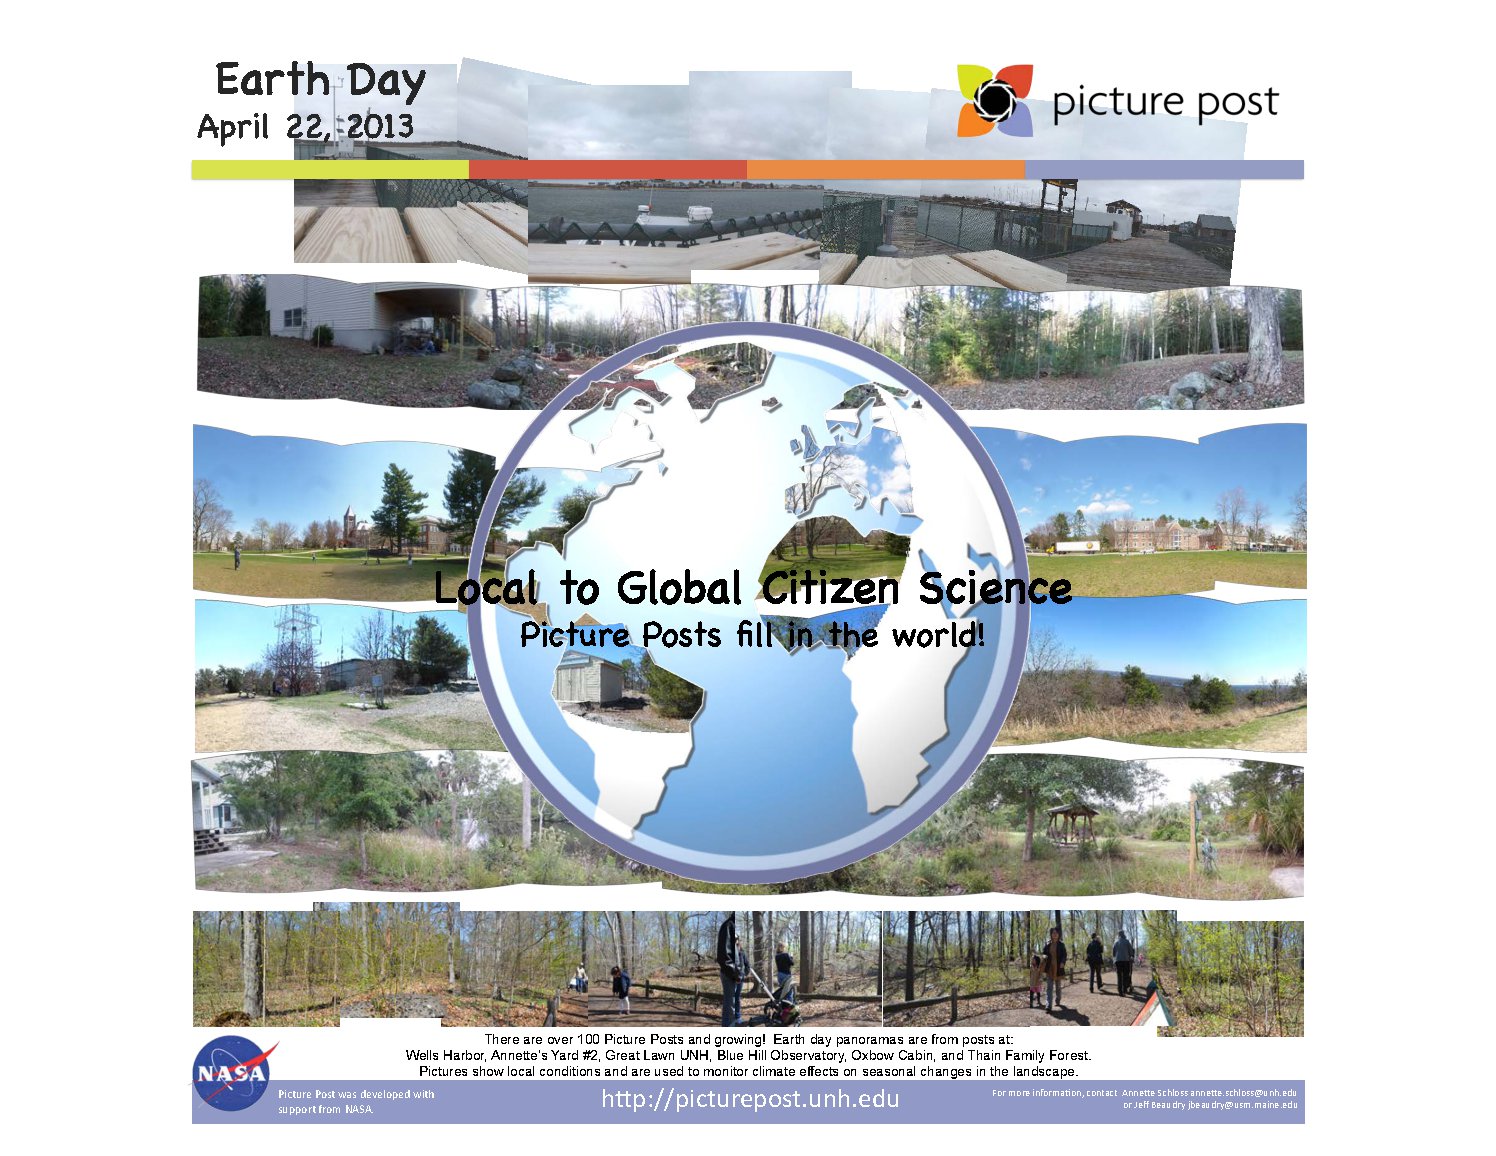 Earth Day 2013 - Picture Post by aschloss